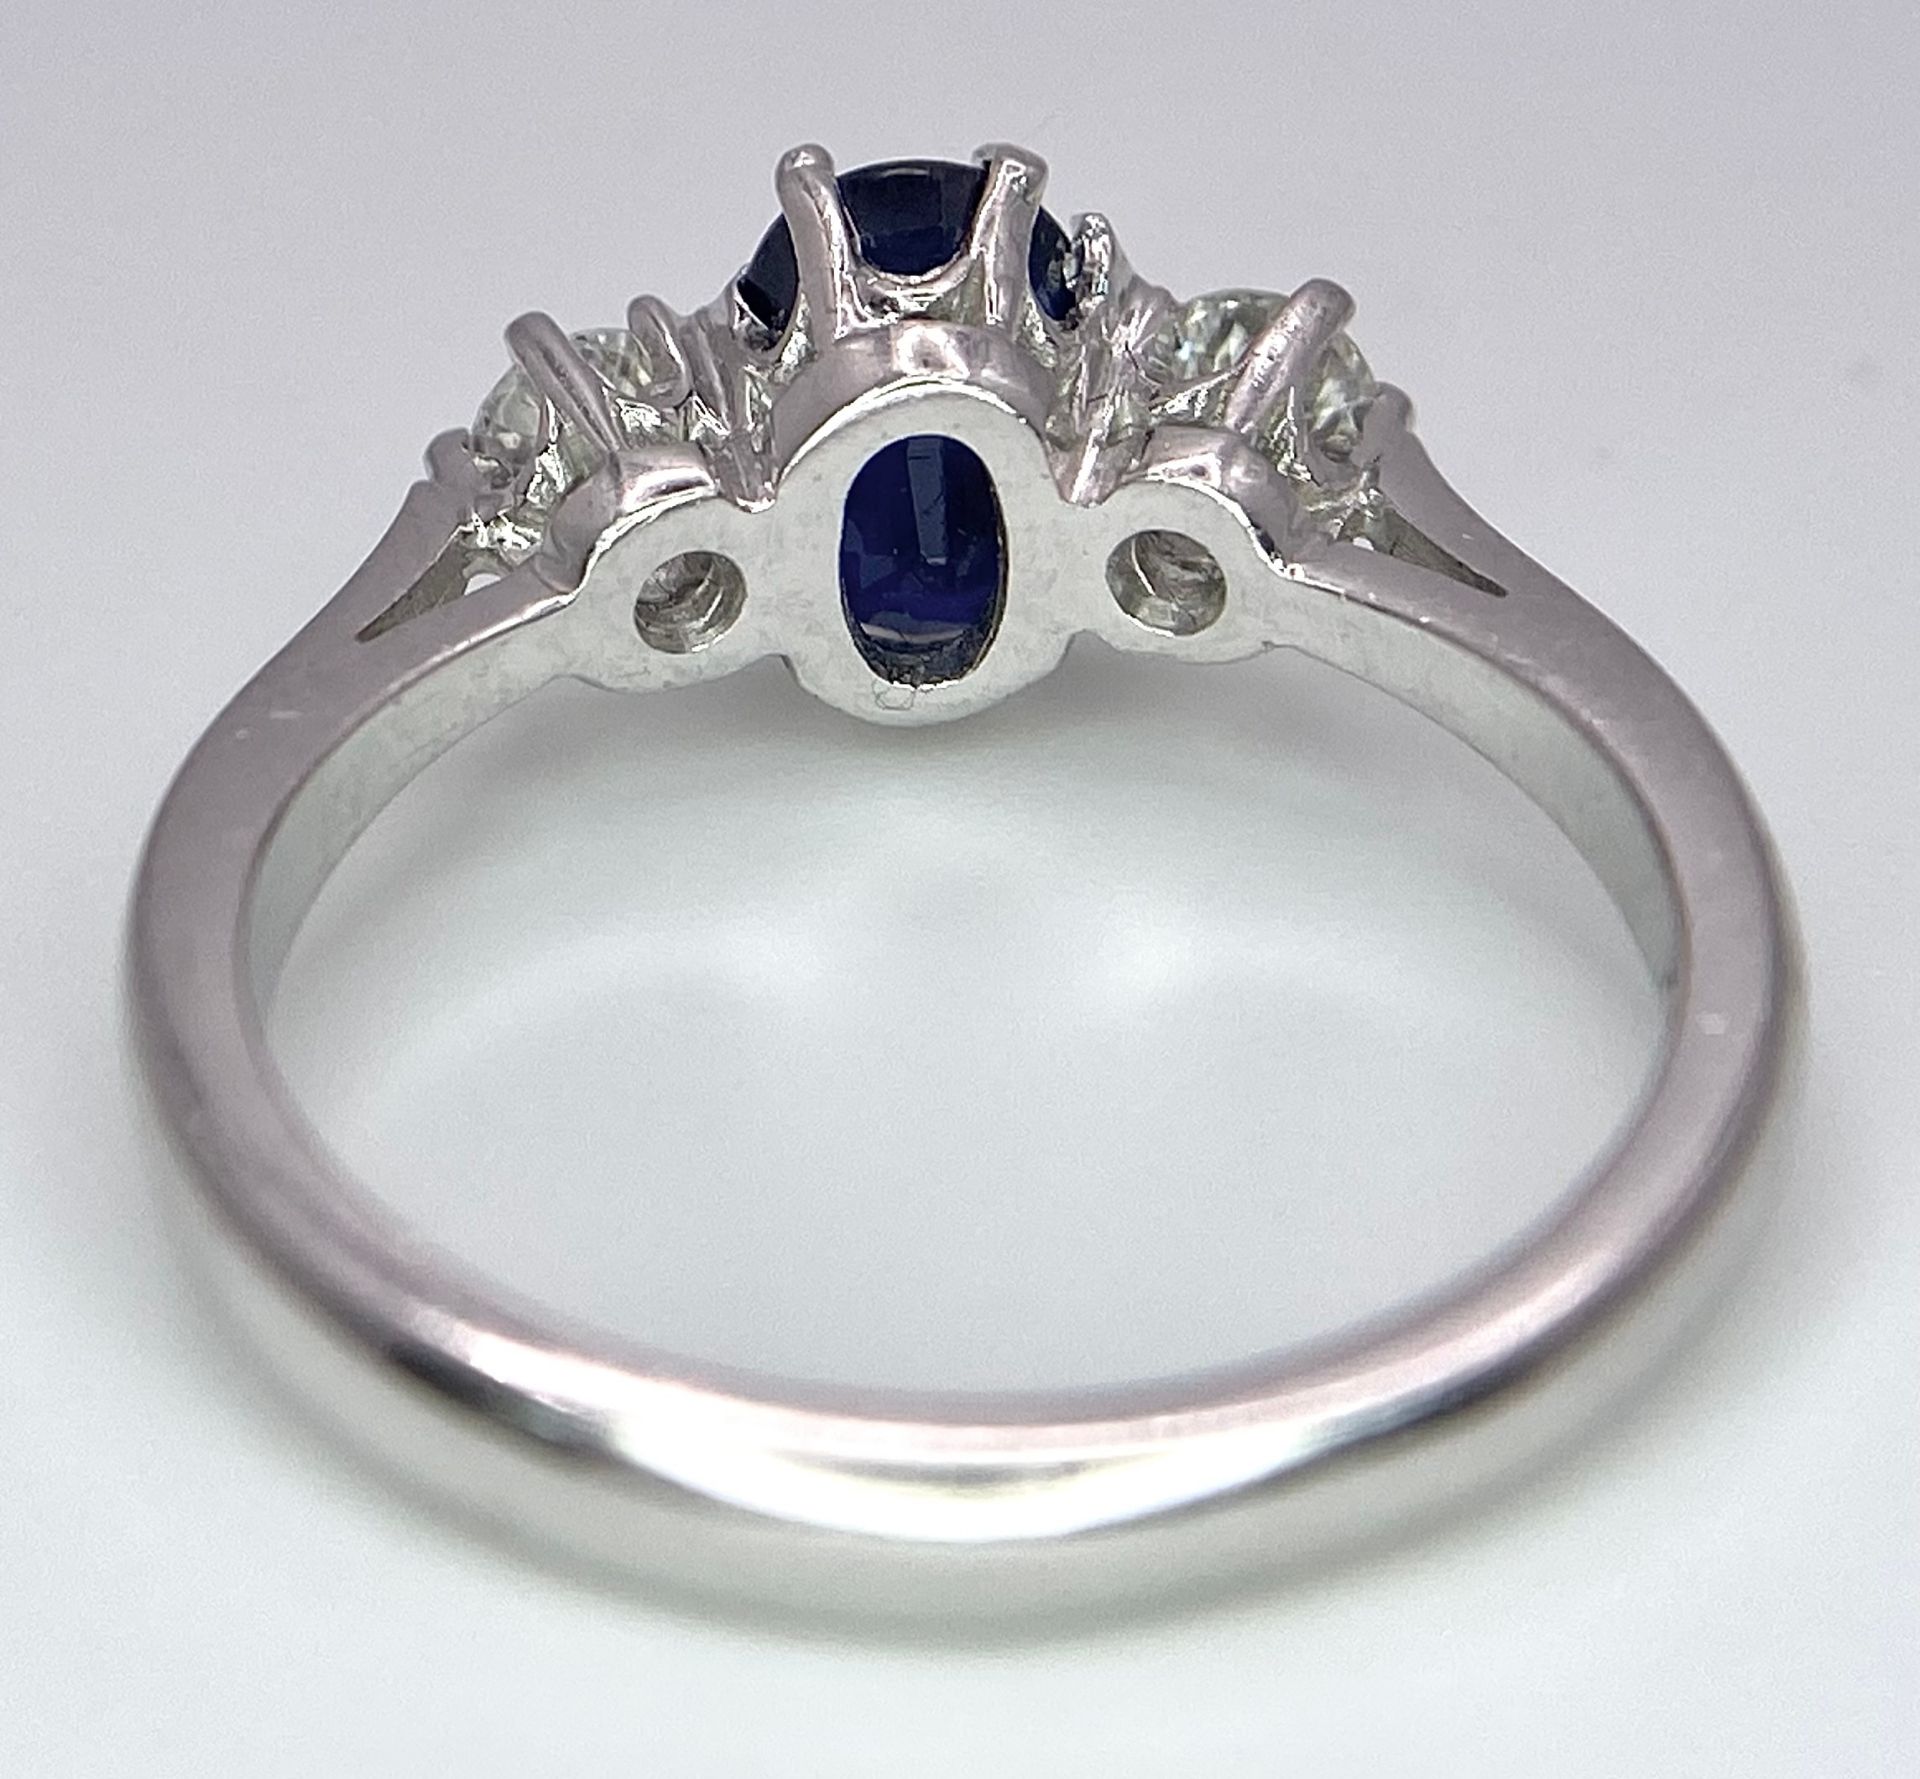 AN 18K WHITE GOLD, DIAMOND AND SAPPHIRE 3 STONE RING. OVAL BLUE SAPPHIRE - 0.75CT AND 0.30CT OF - Bild 5 aus 6